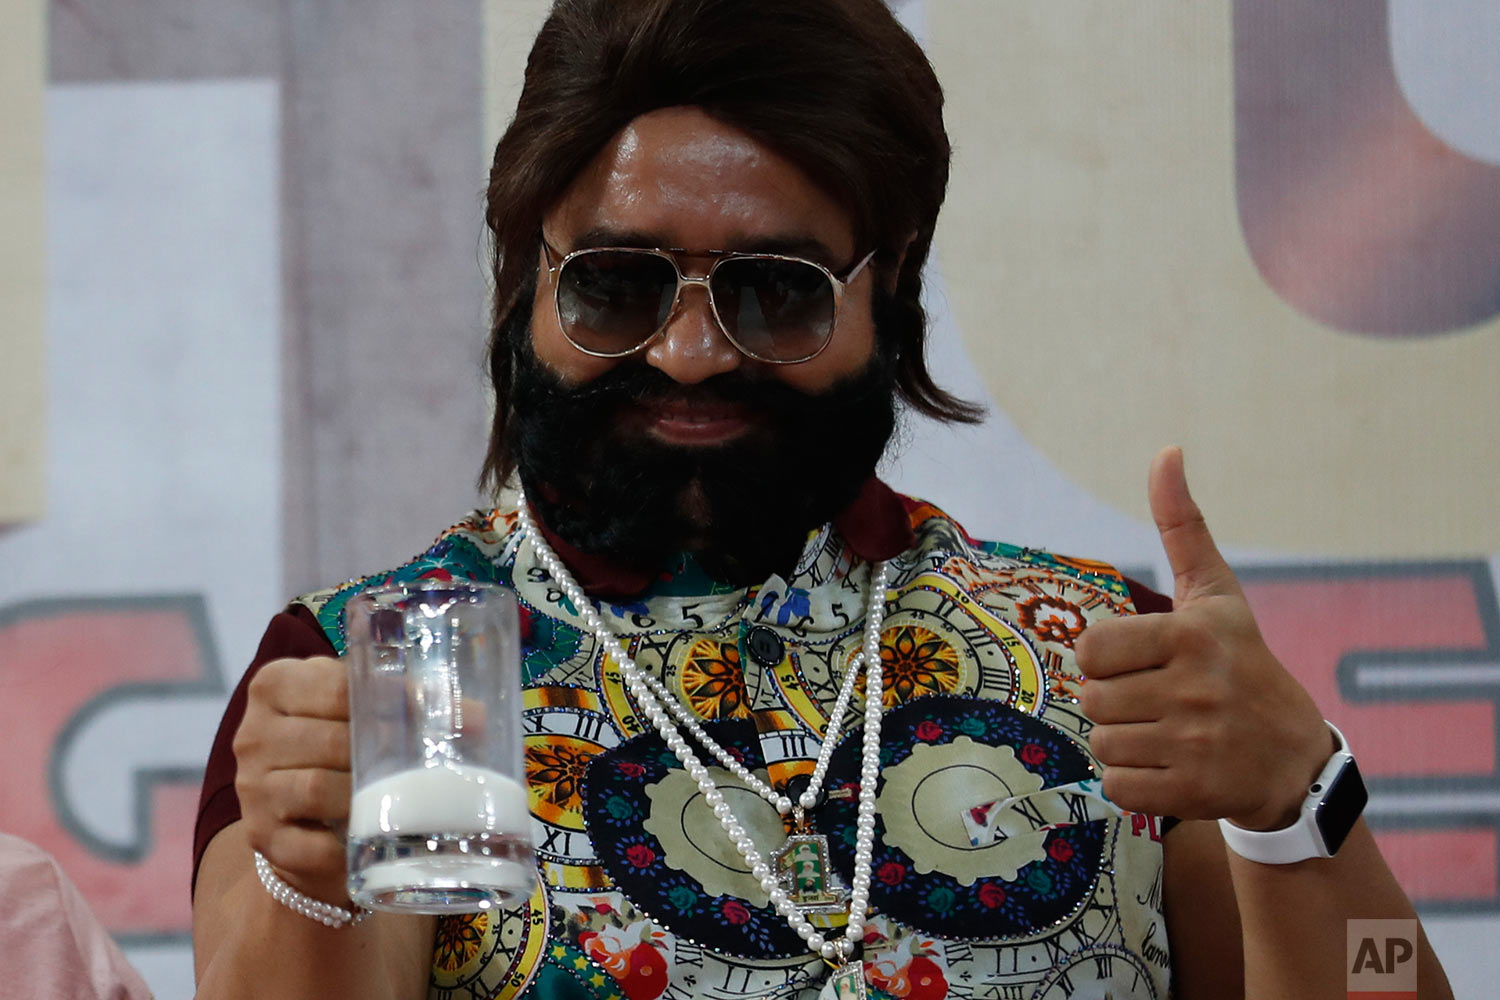  In this May 17, 2017 photo, Indian spiritual leader turned actor who calls himself Dr. Saint Gurmeet Singh Ram Rahim Insan gestures as he holds up a glass of milk at a "Cow Milk Party" during the premiere of the movie "Jattu Engineer" in New Delhi, 